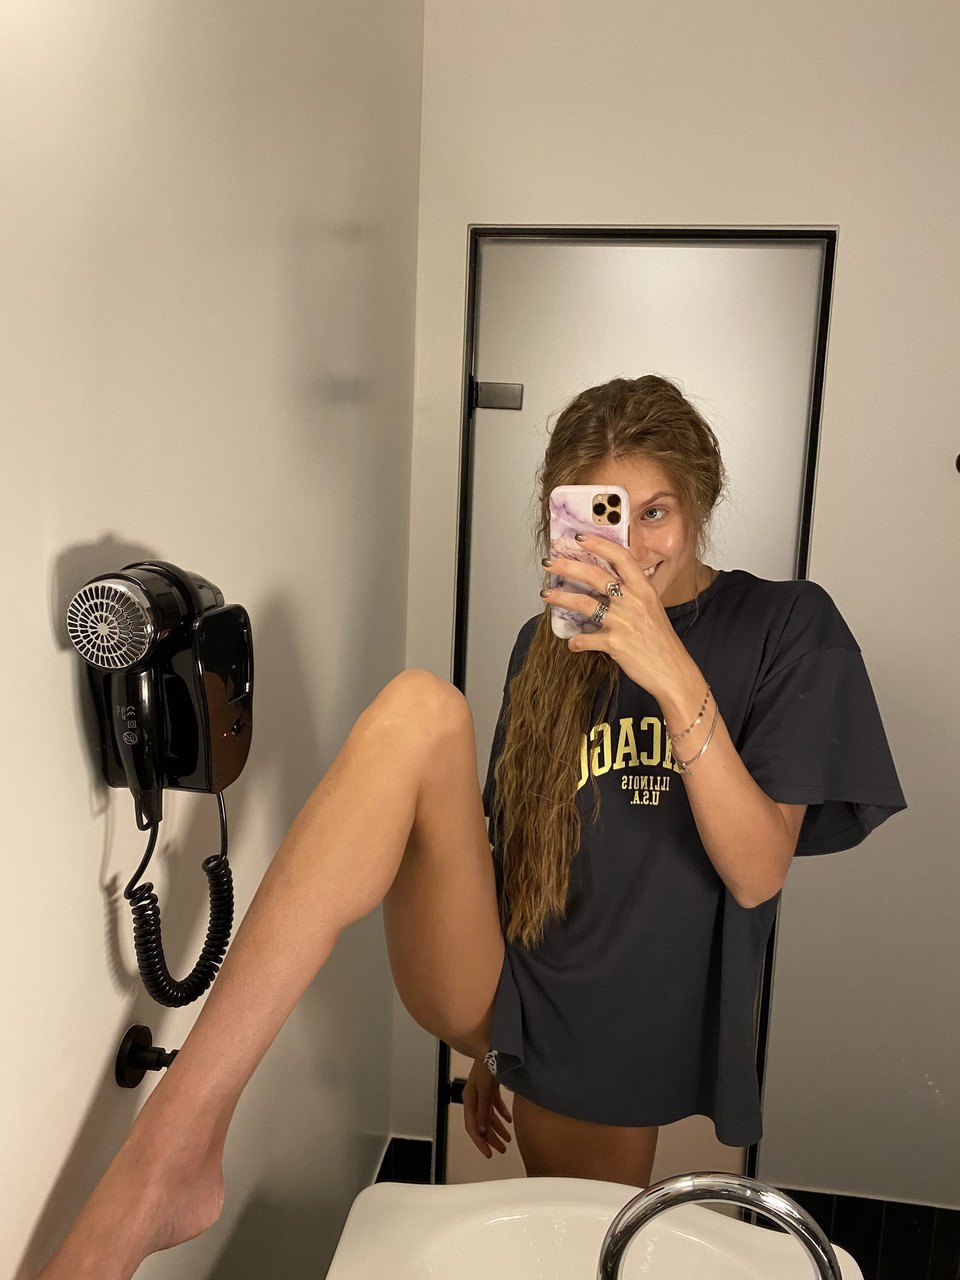 Skinny babe takes nude selfies showing her tiny tits and her tight ass ポルノ写真 #423874984 | OnlyFans JasminJass Pics, Homemade, モバイルポルノ